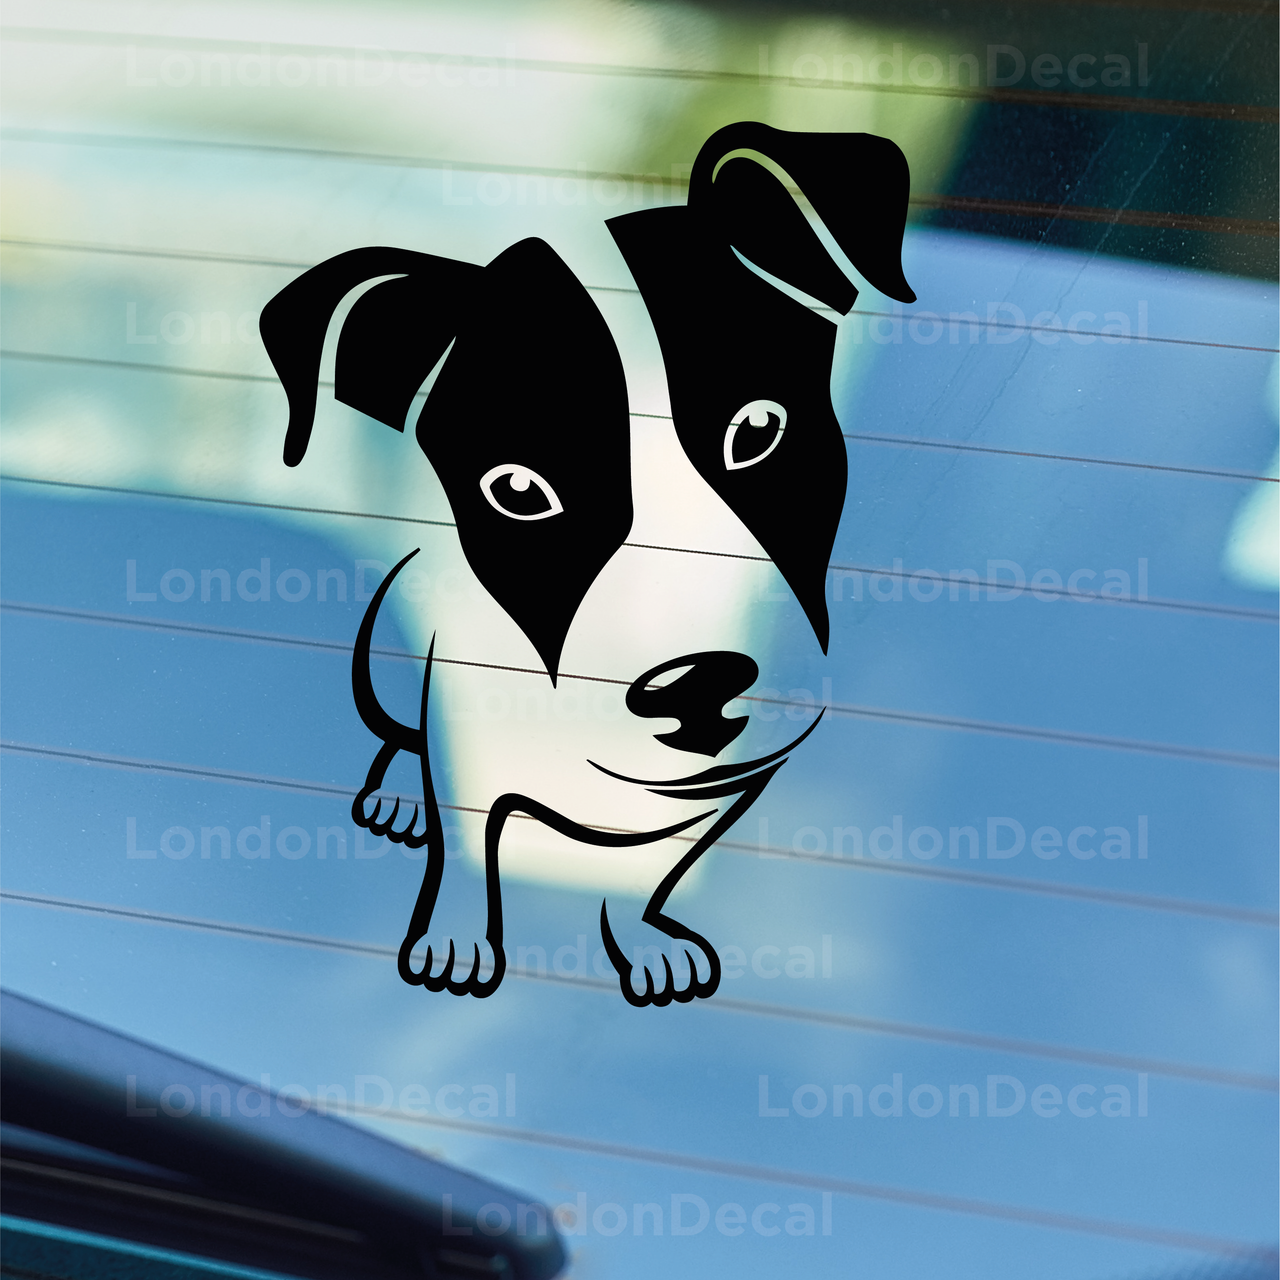 Jack Russell Terrier Dog Car Decal